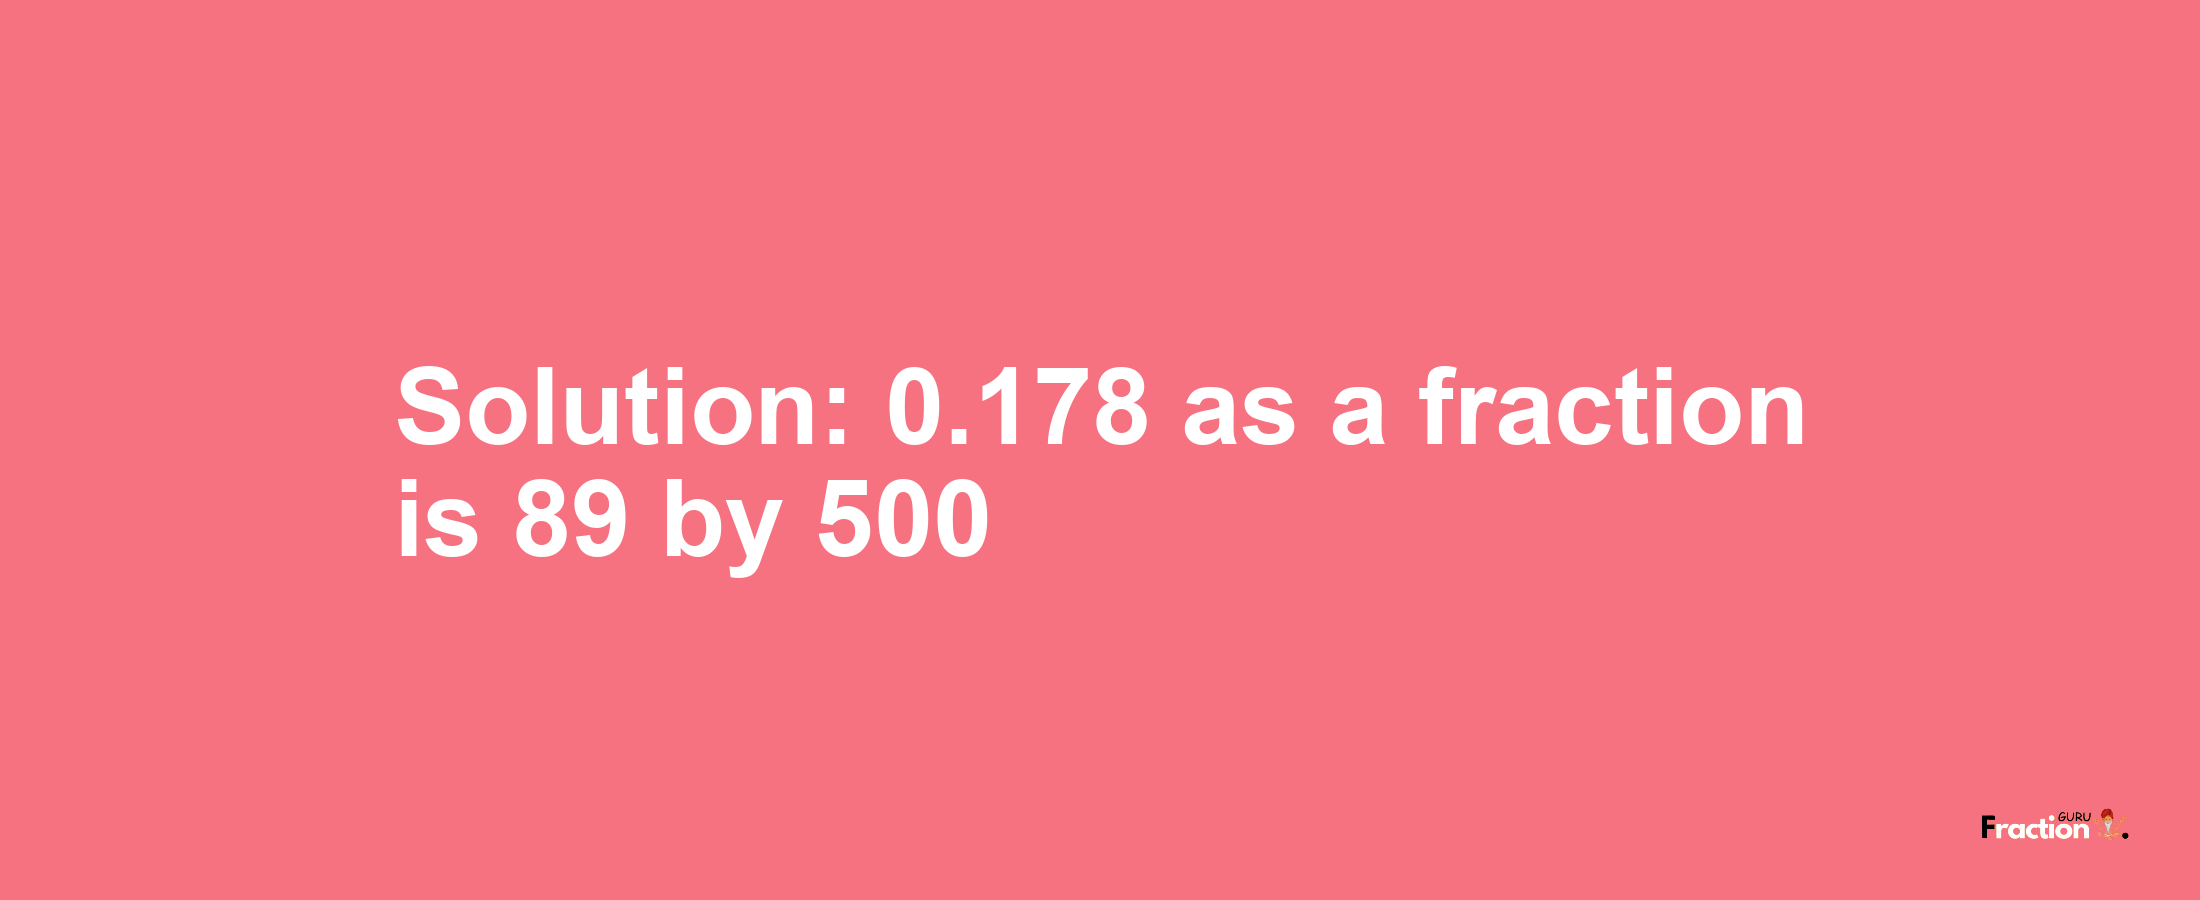 Solution:0.178 as a fraction is 89/500